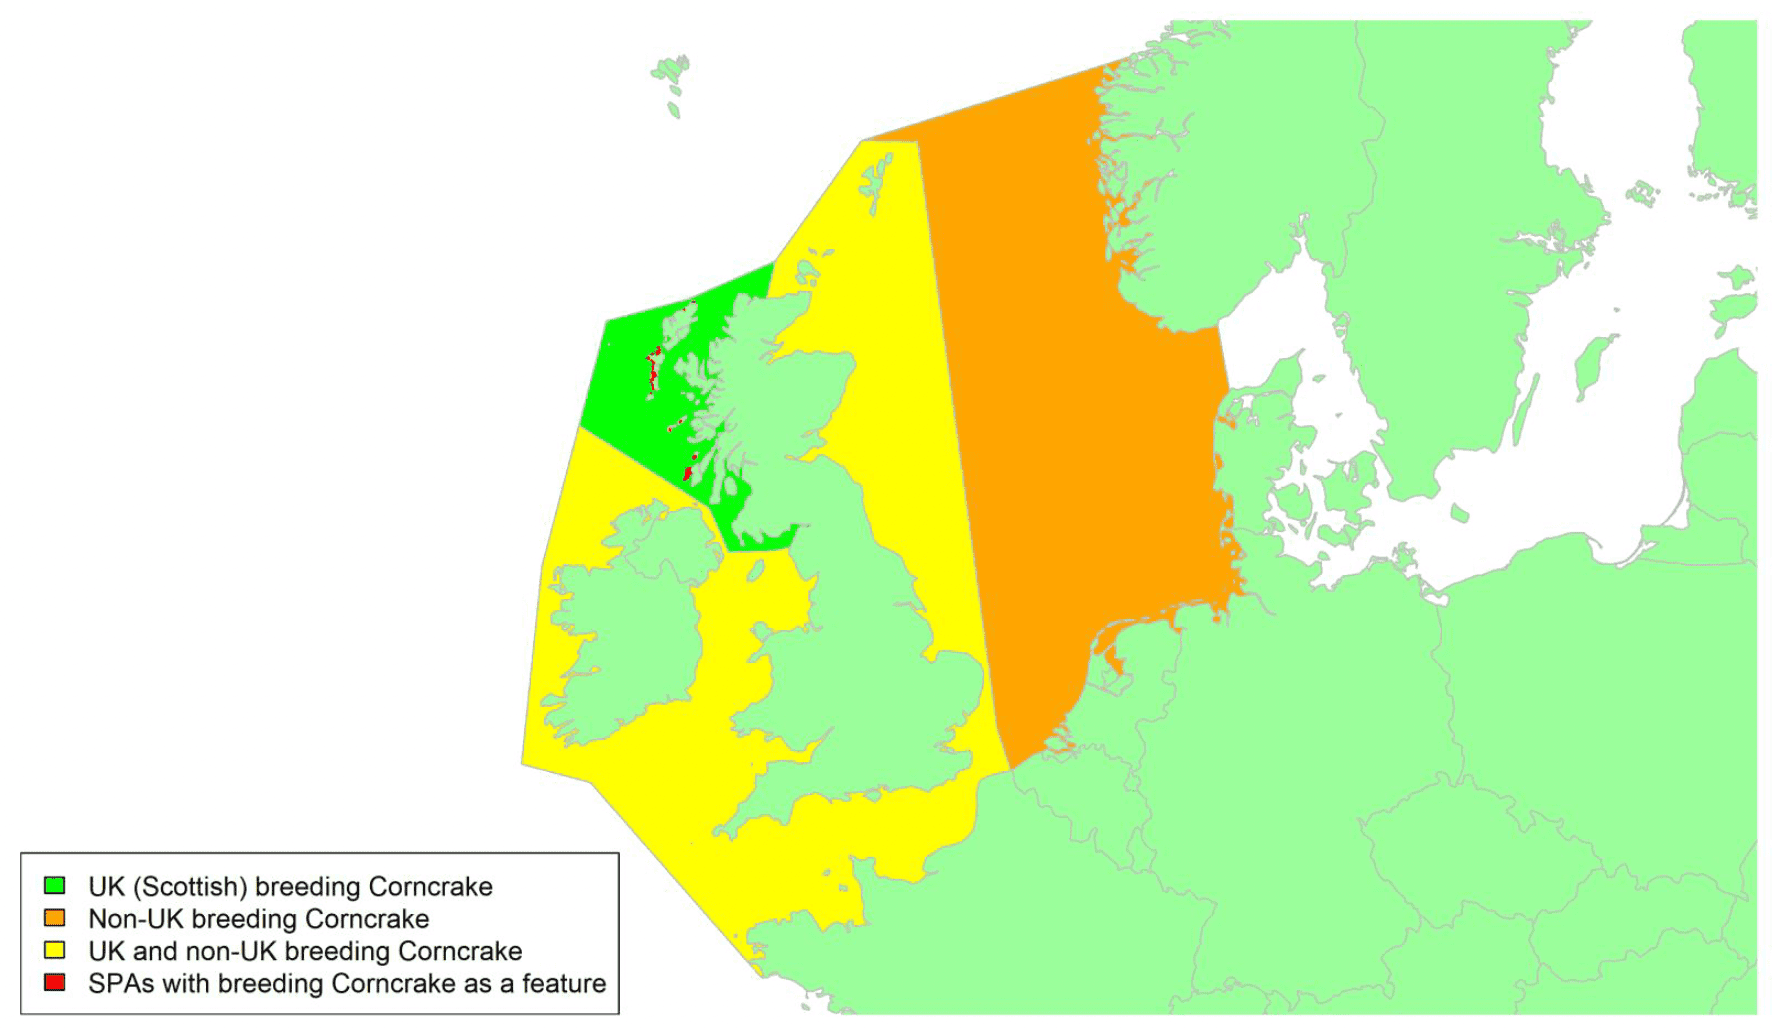 Map of North West Europe showing migratory routes and SPAs within the UK for Corncrake as described in the text below.